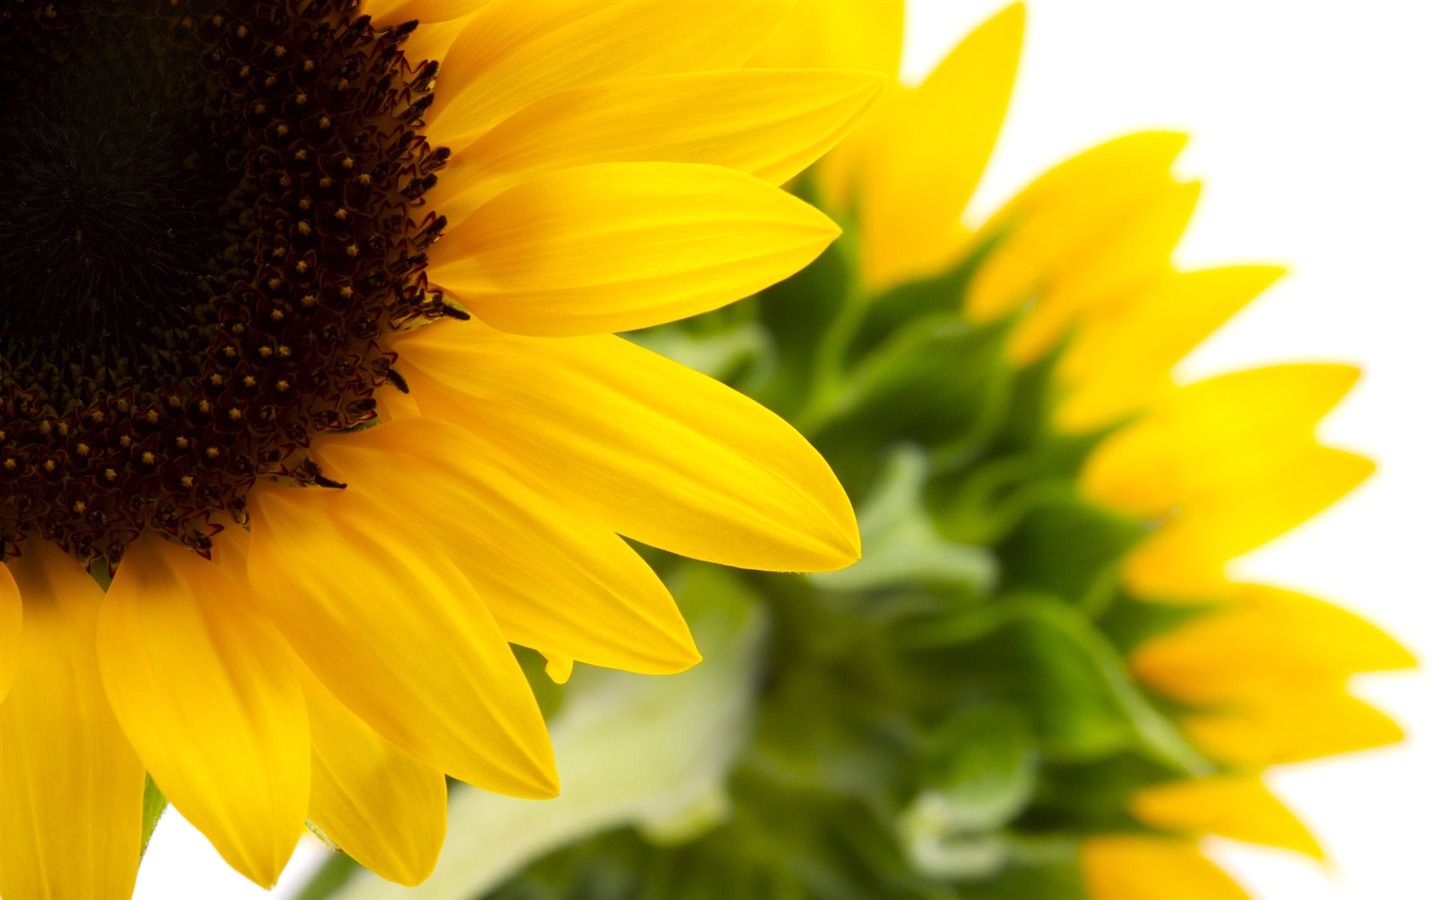 Sunny sunflower photo HD Wallpapers #26 - 1440x900